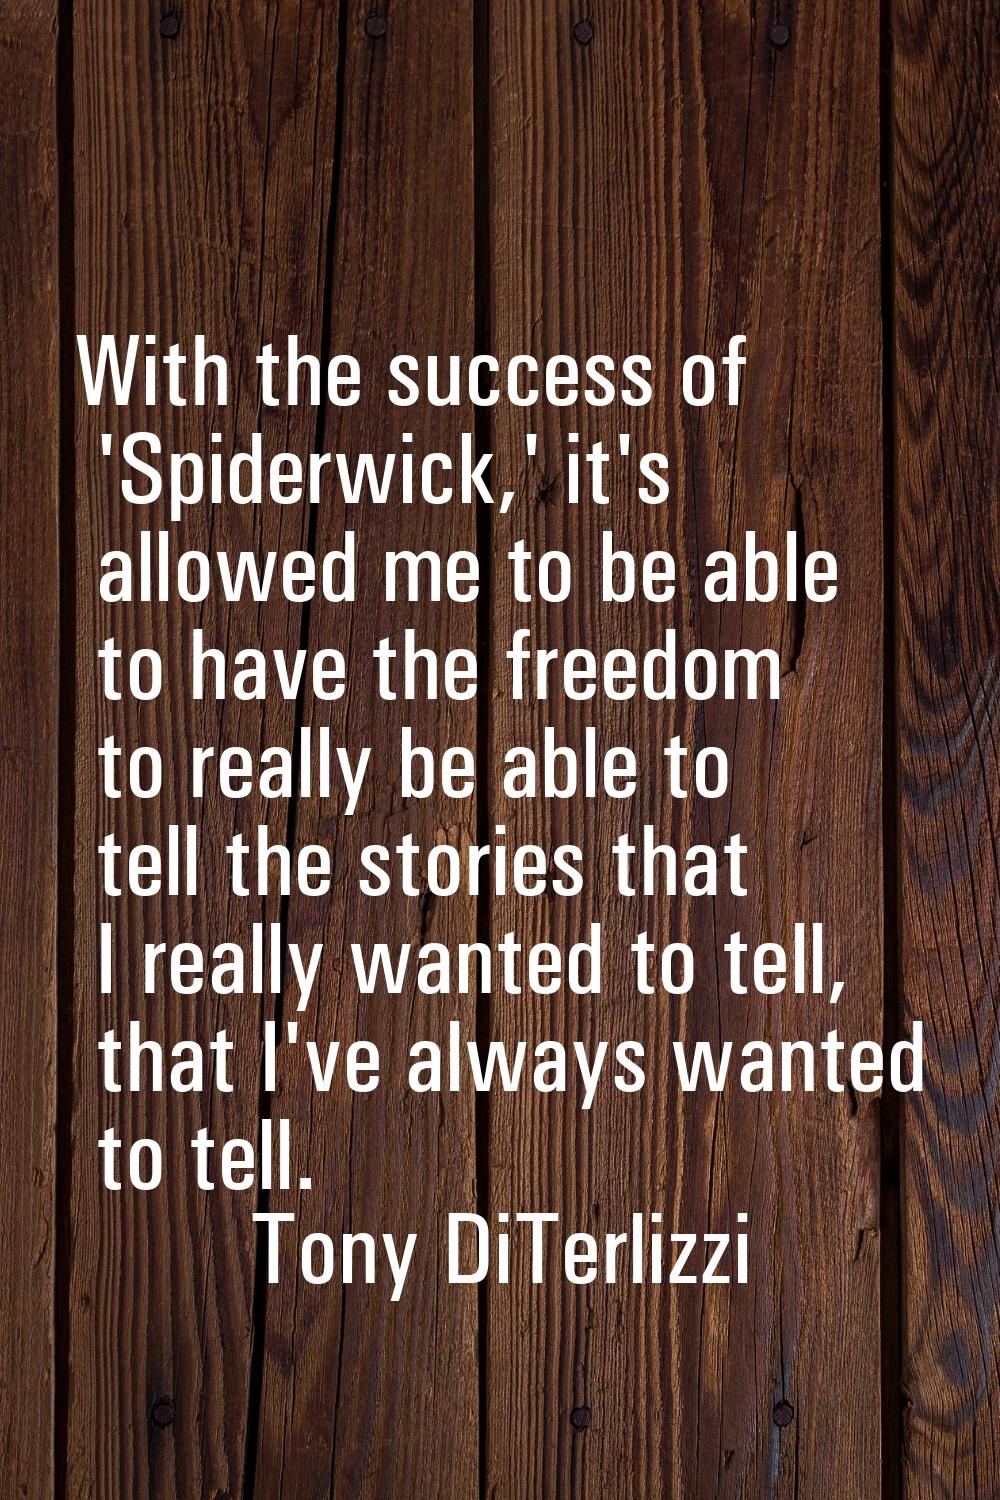 With the success of 'Spiderwick,' it's allowed me to be able to have the freedom to really be able 